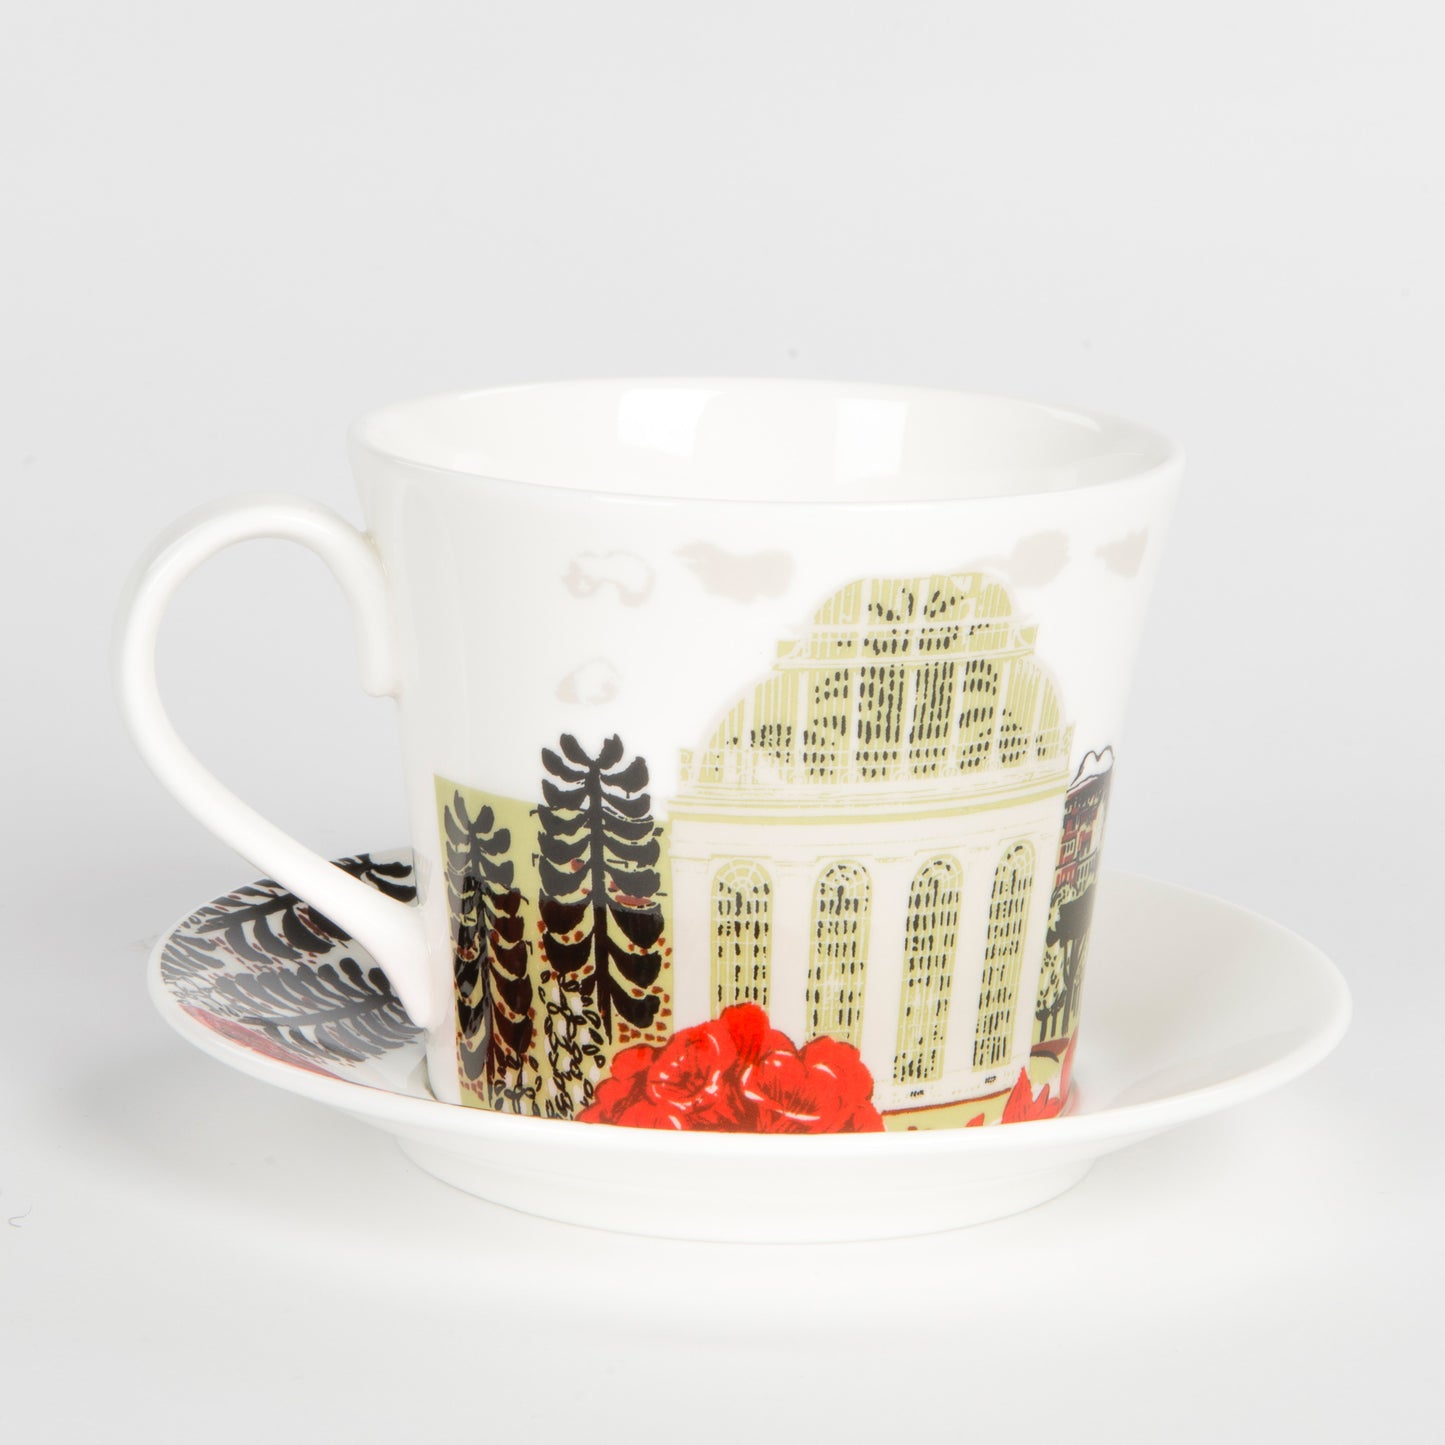 Palm House - Breakfast Cup and Saucer